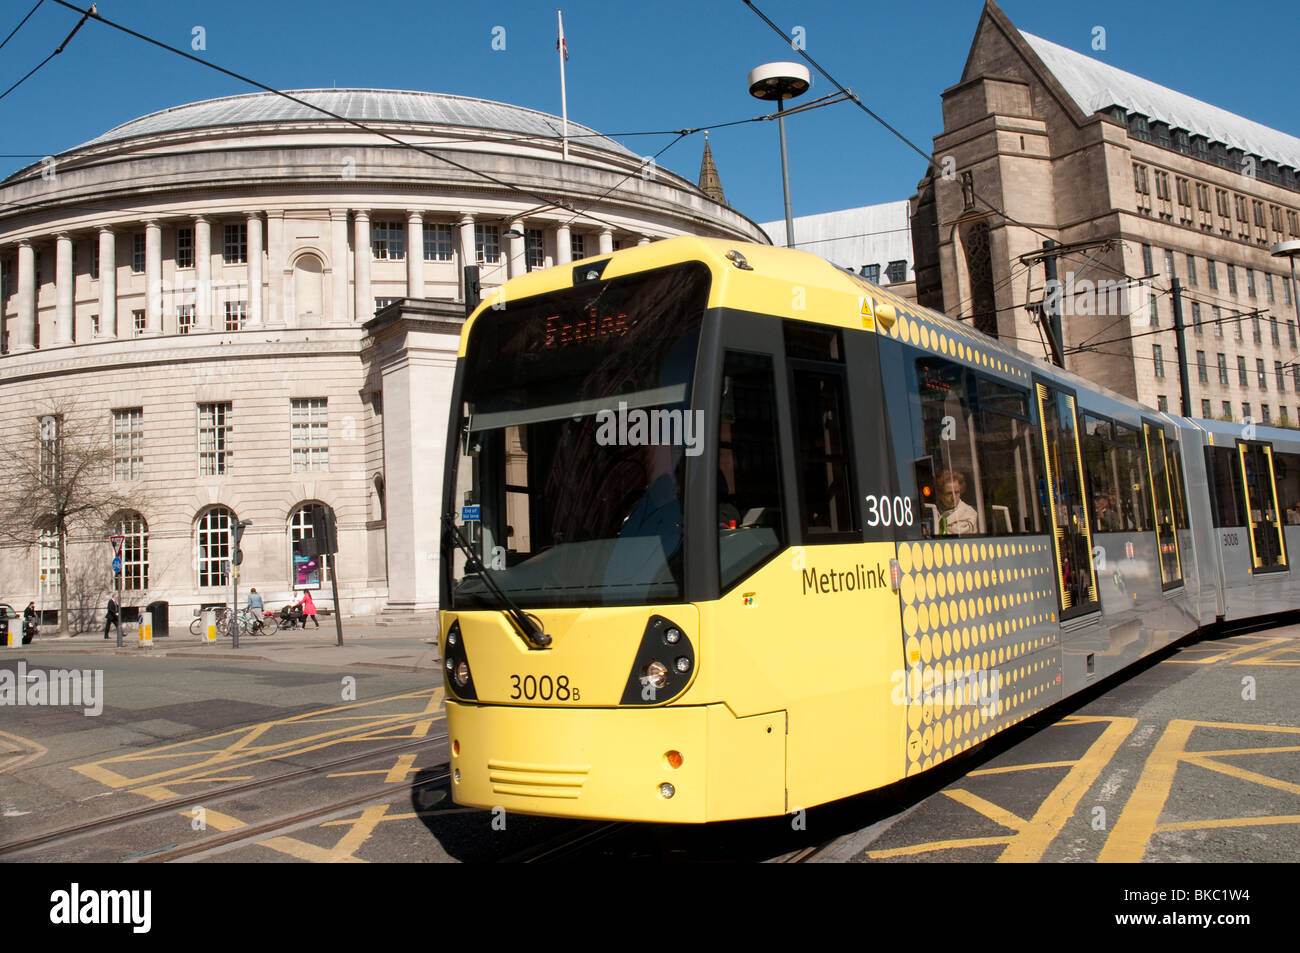 Tramway Metrolink St Peter's Square, Manchester, Angleterre. Banque D'Images